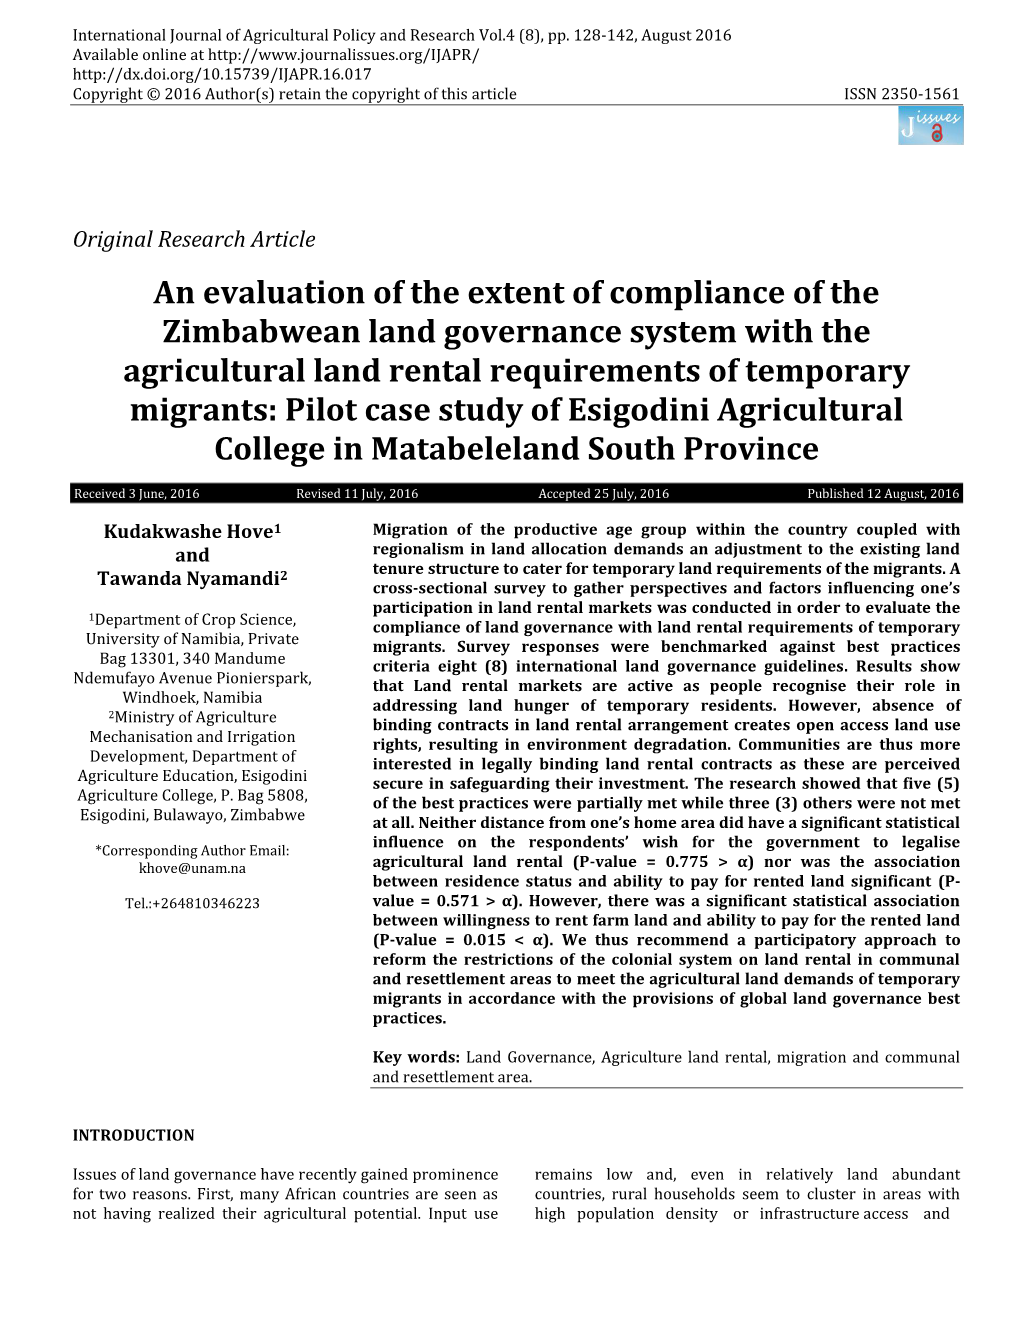 An Evaluation of the Extent of Compliance of the Zimbabwean